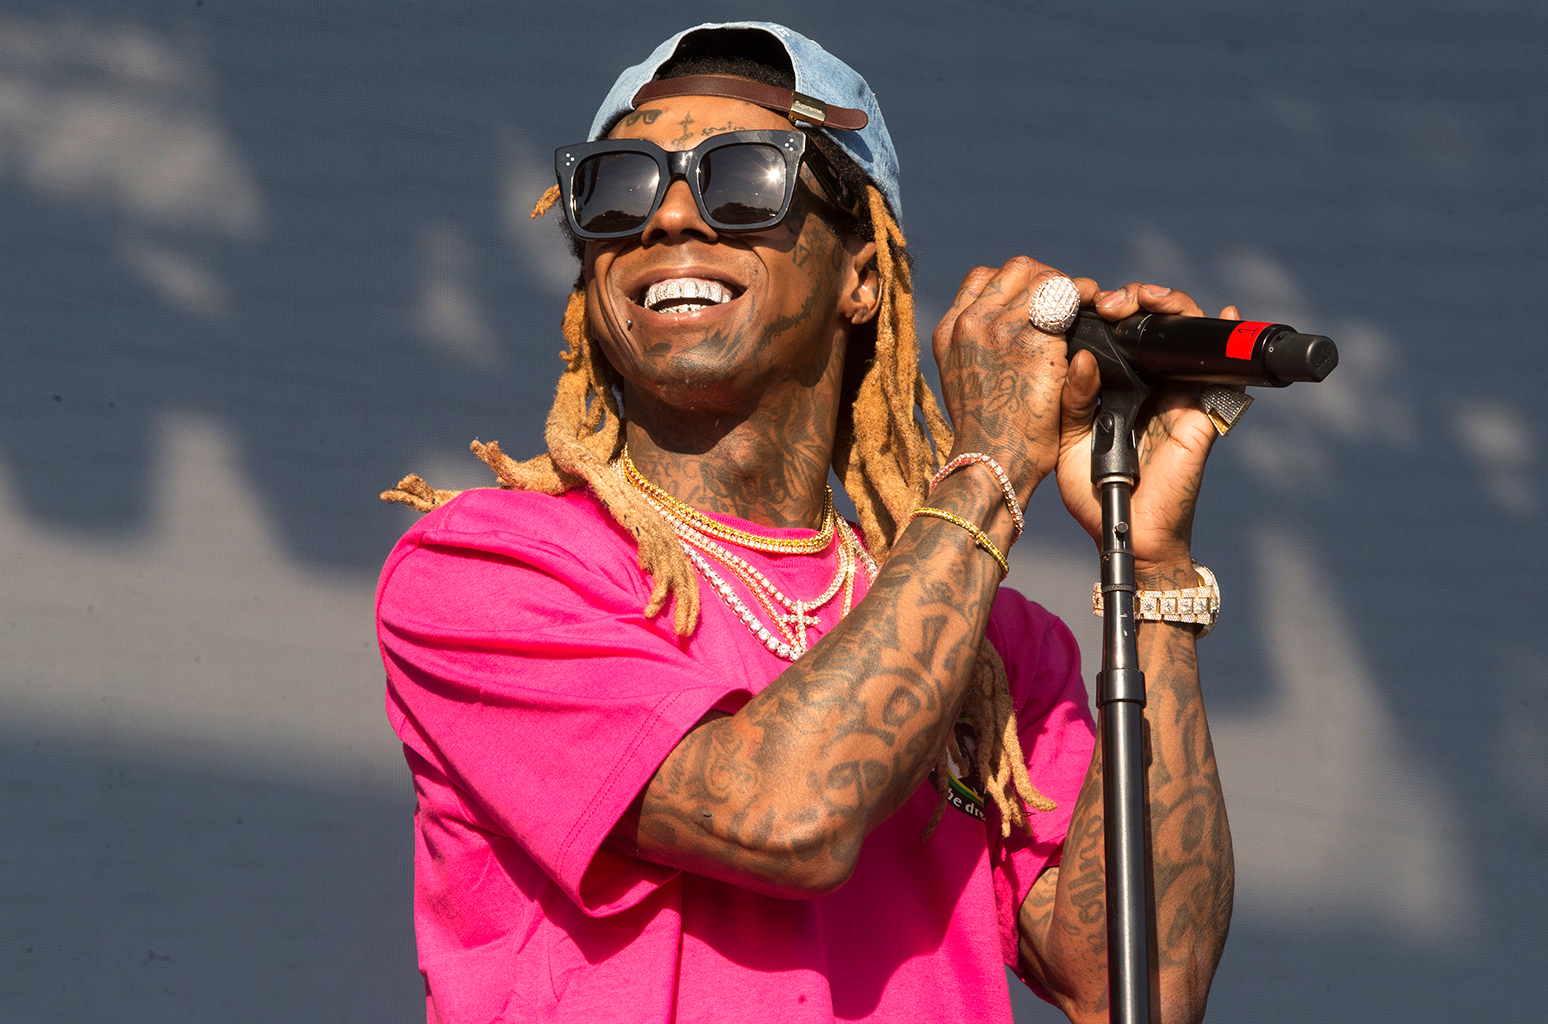 Lil Wayne Drops First Album In 5 Years With “Tha Carter V” Ft. Kendrick Lamar ...